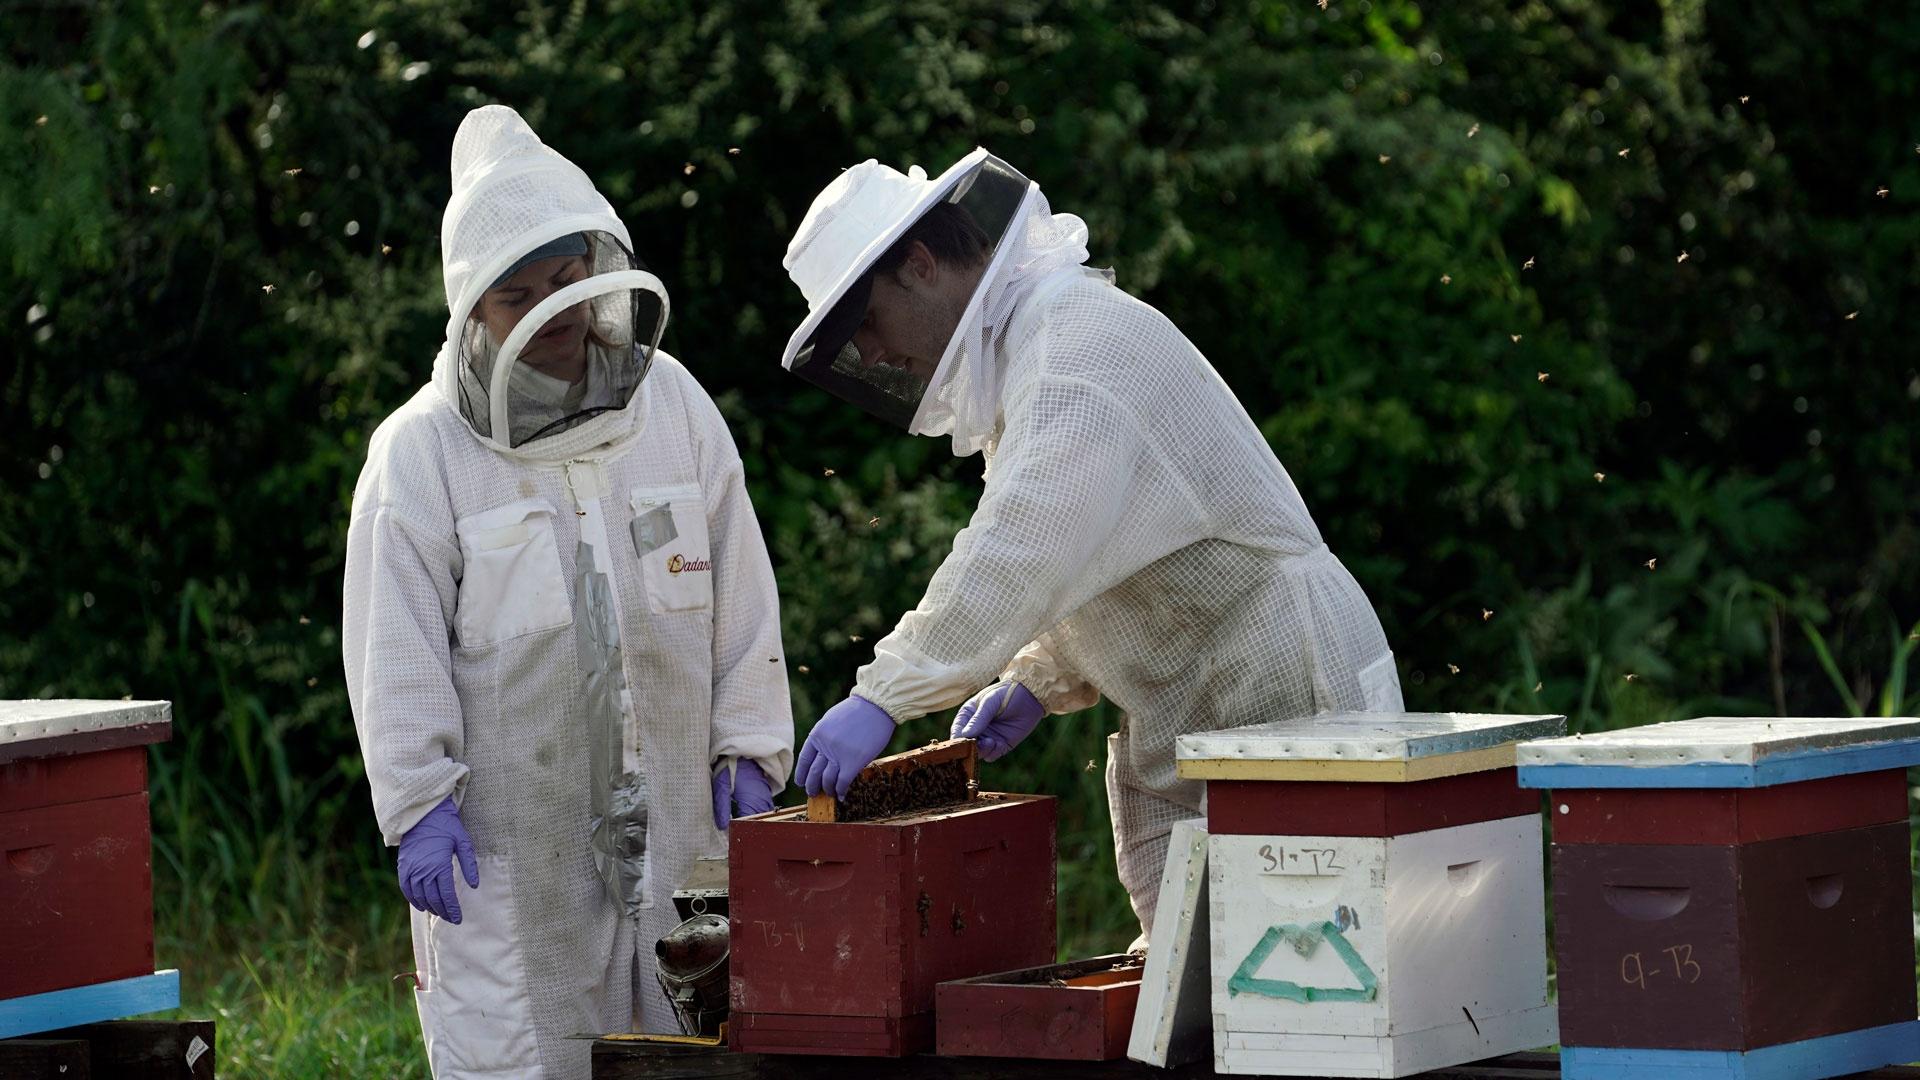 Two students check a honey bee hive, as featured on Season 2 of "Texas A&M Today."